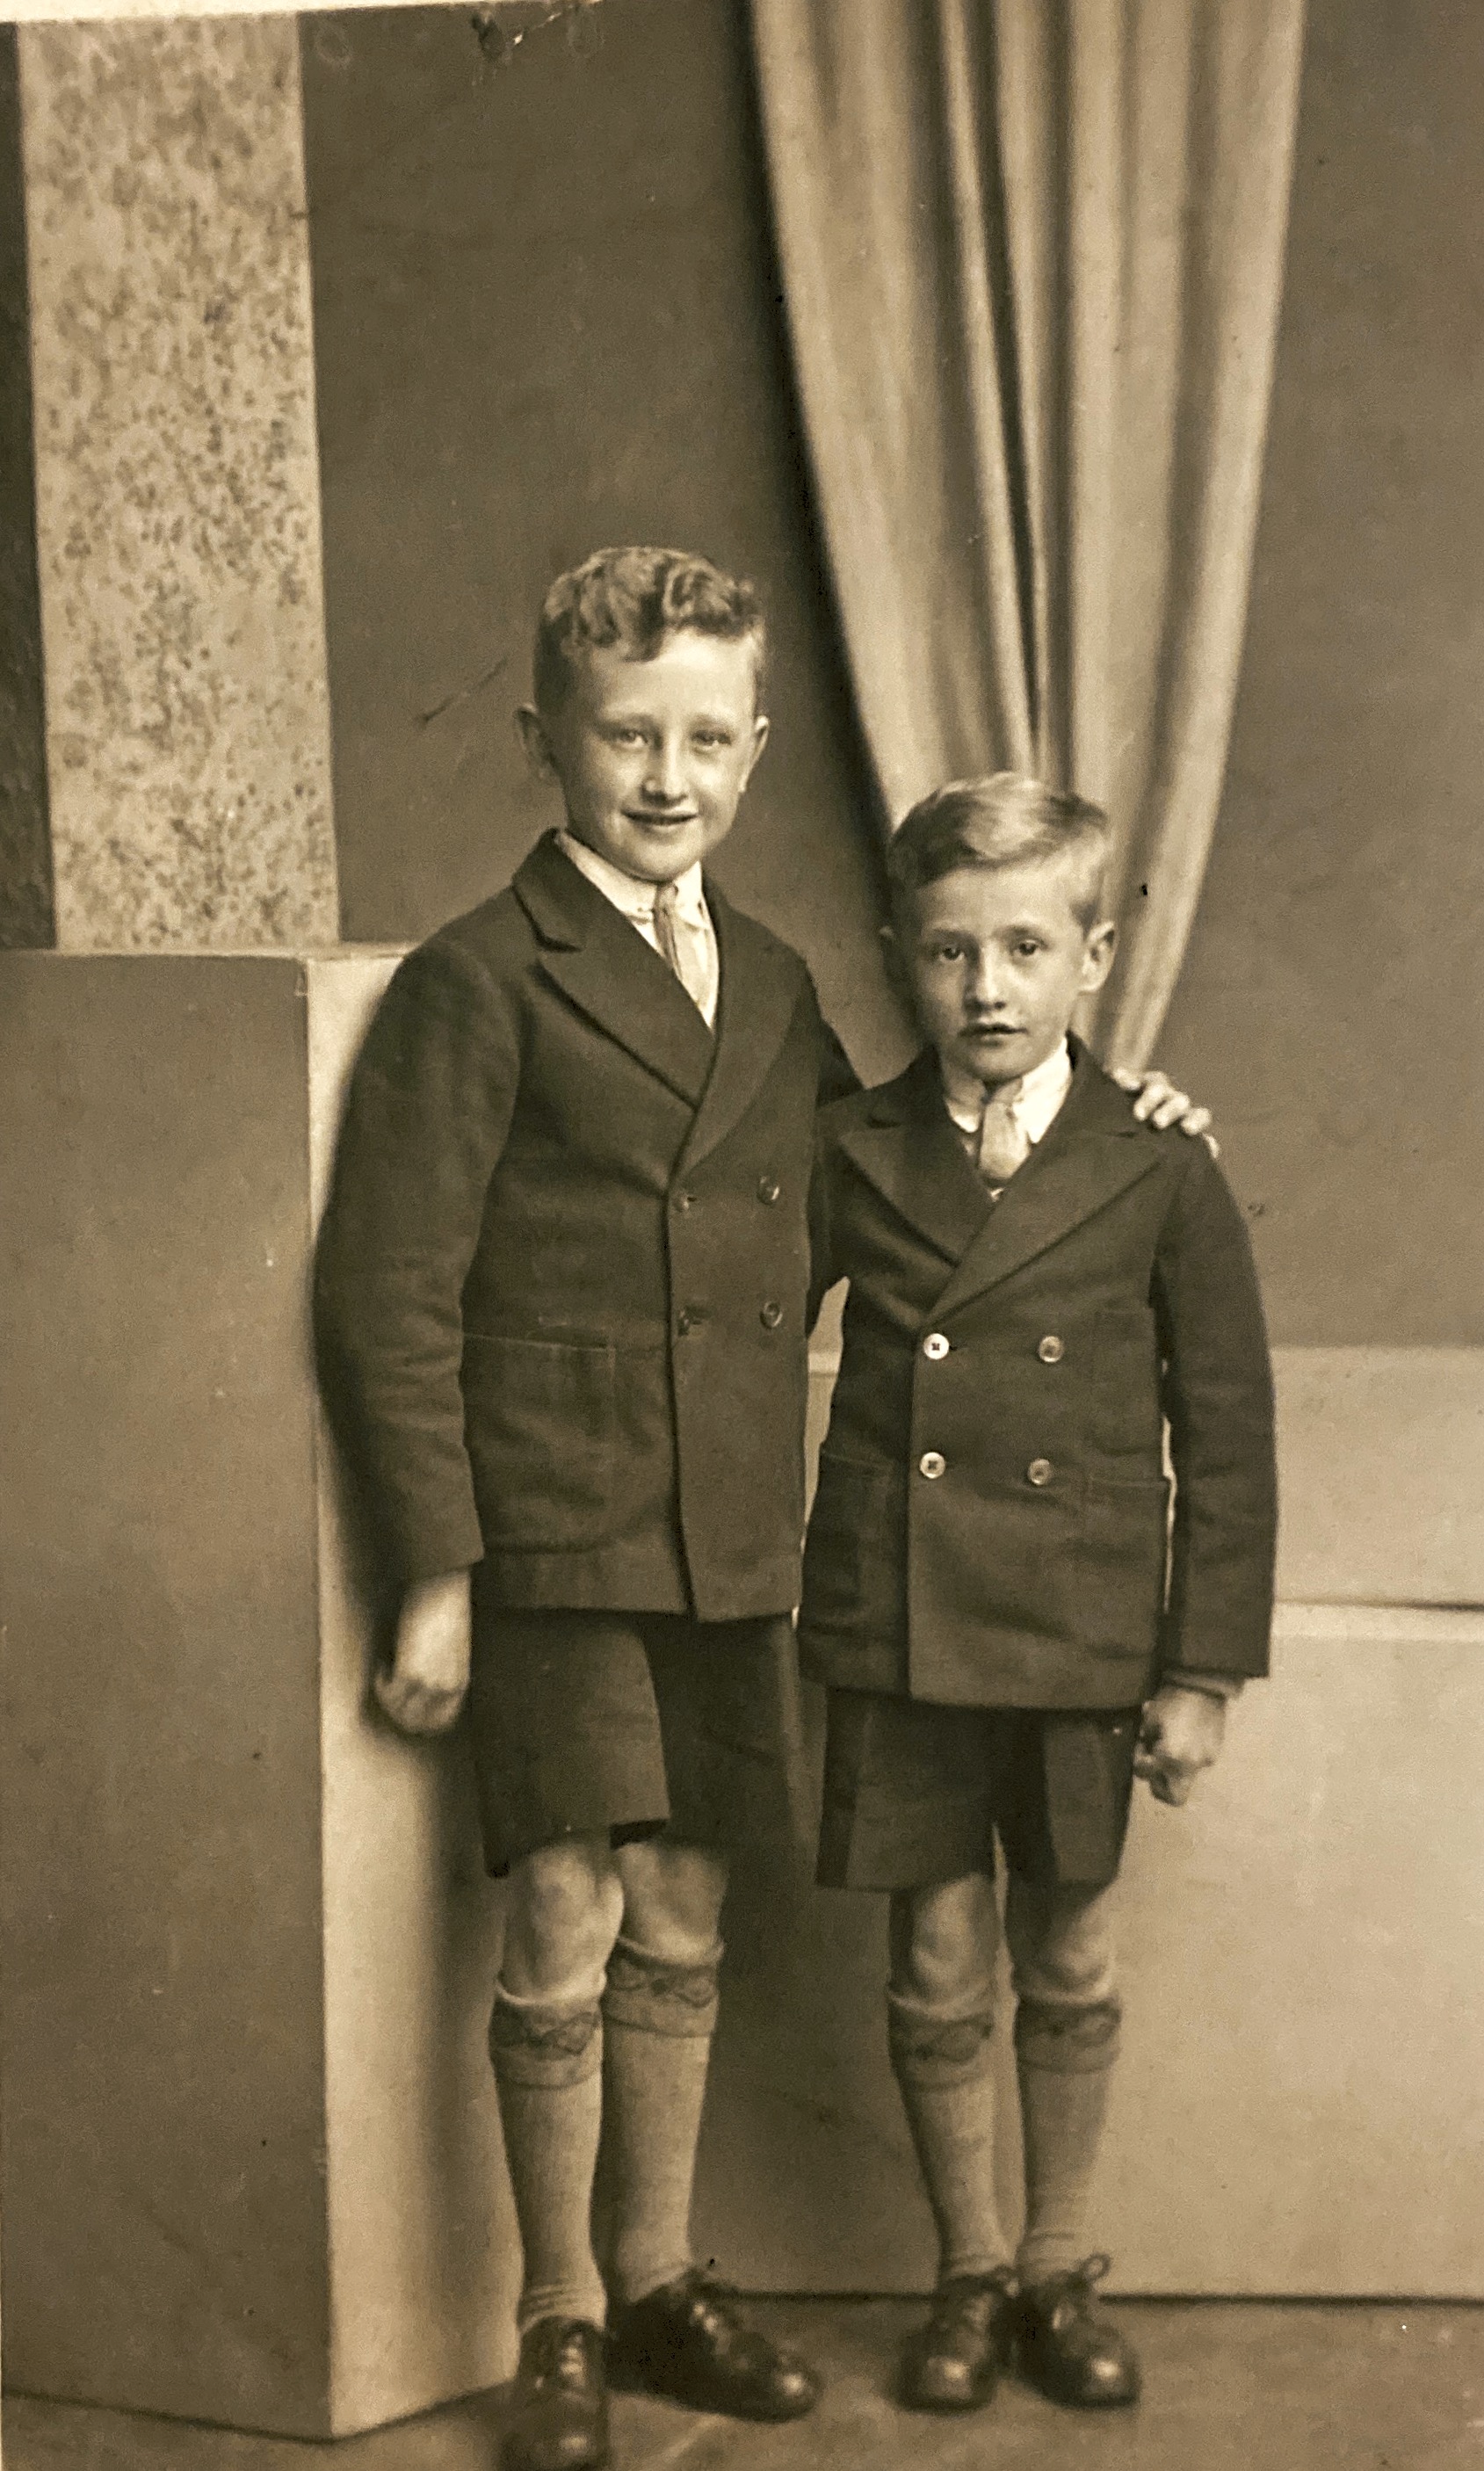 Young Bill and George Nicol, c 1934